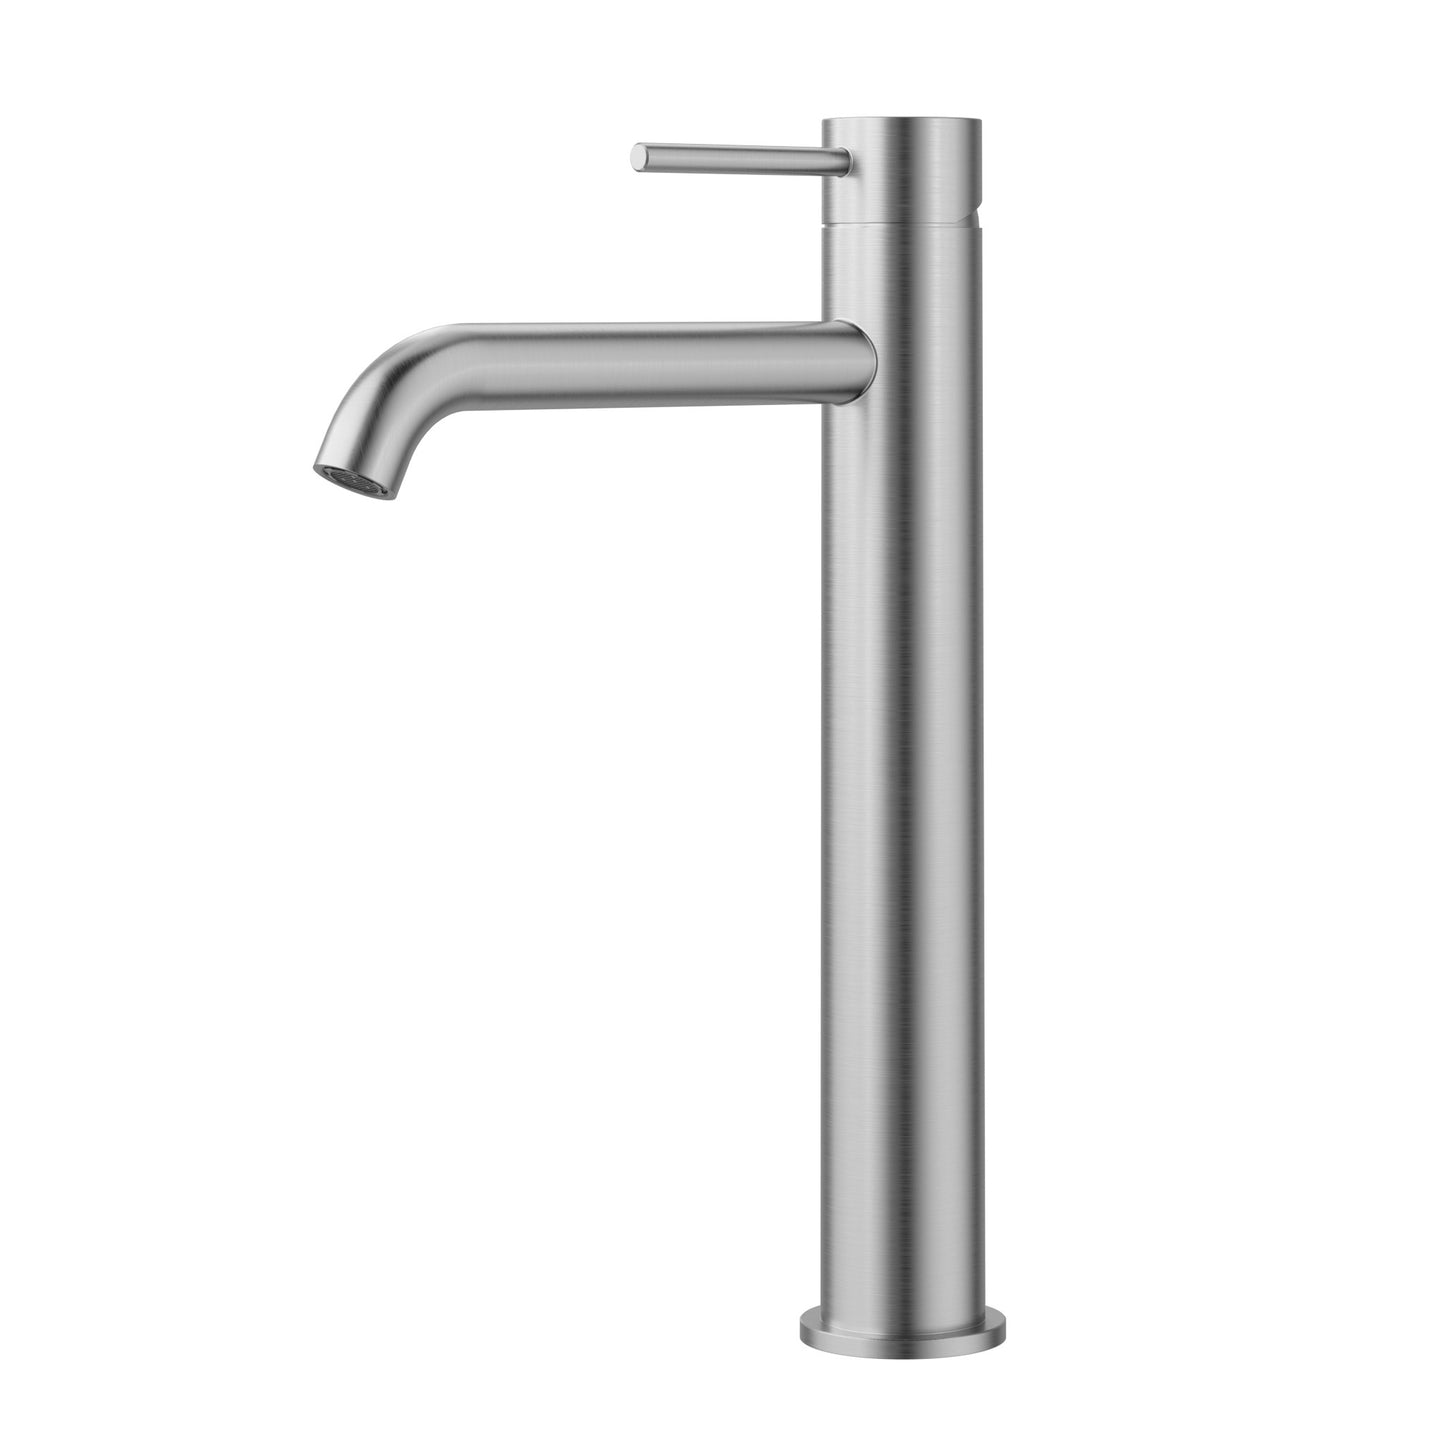 Otus SS Slim Tall Curved Spout Basin Mixer